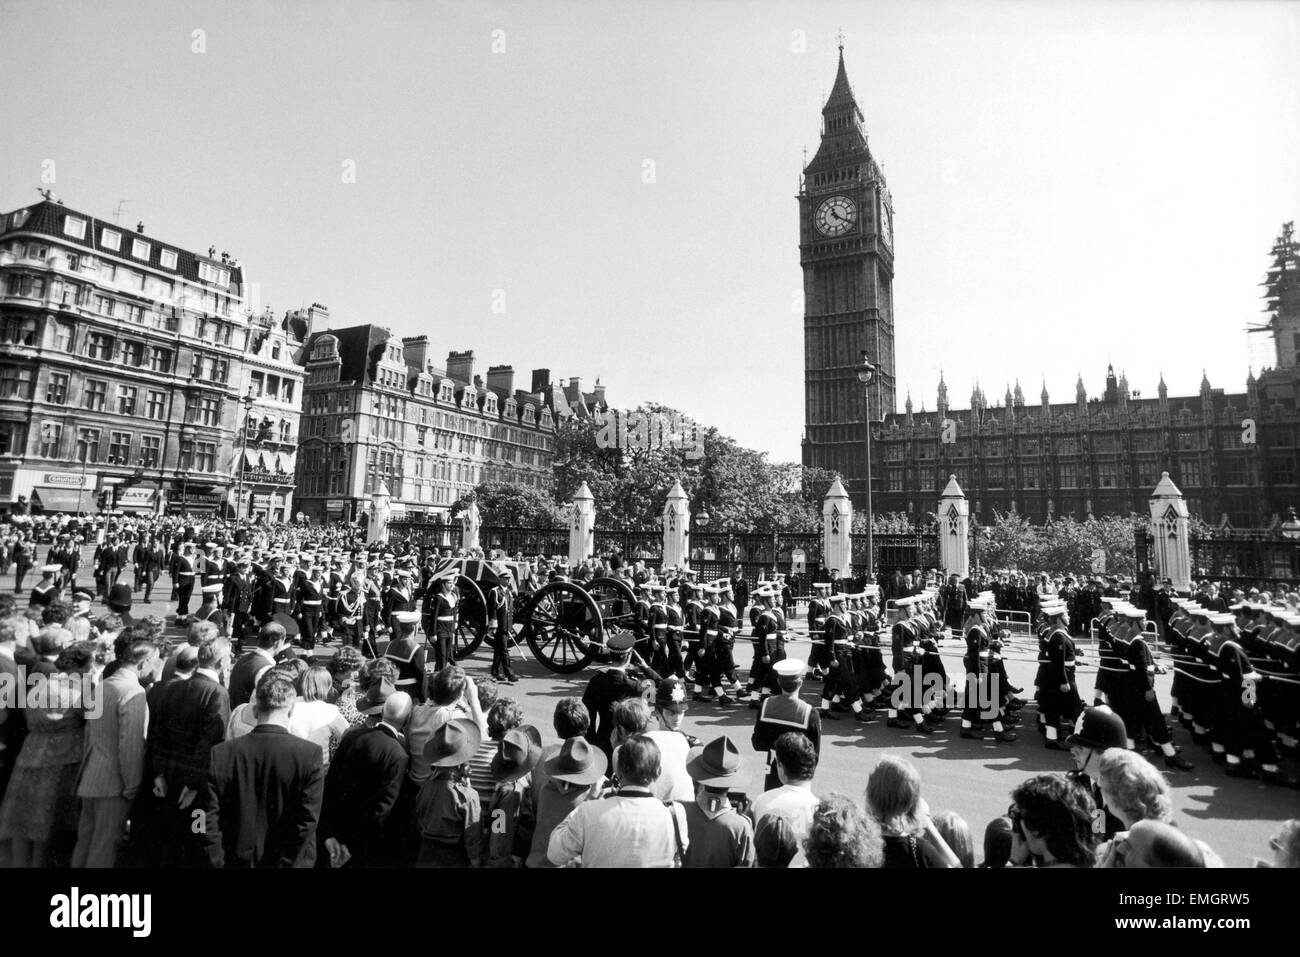 Funeral of Earl Mountbatten September 1979 Bearer party from HMS Mercury with coffin on gun carriage pass through Parliament Square. The police lining the route faced the crowd and missed the occasion. 5th September 1979 Stock Photo